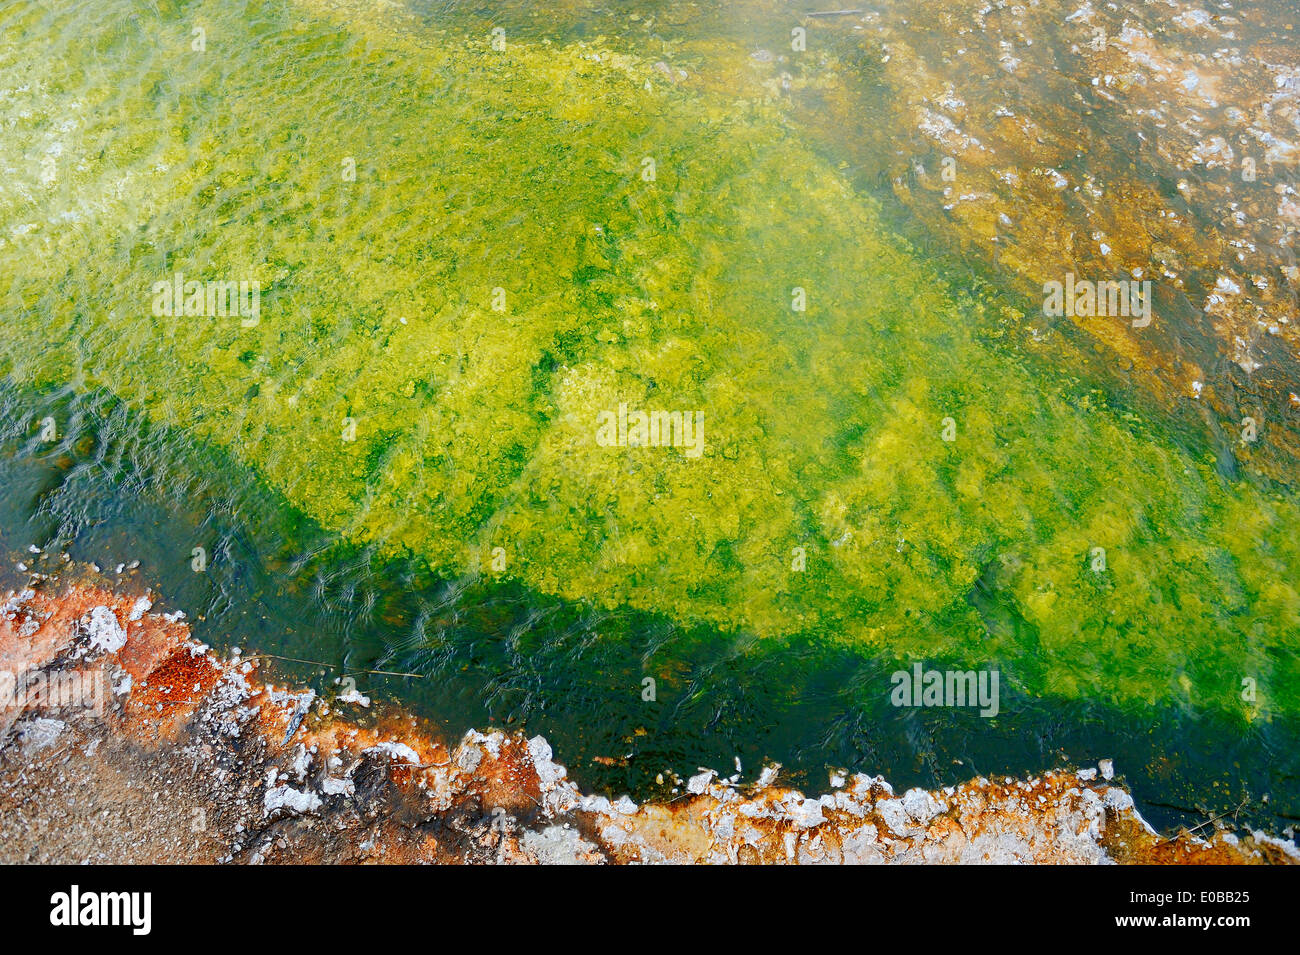 Algal-bacterial mats and mineral deposits at hot spring, Biscuit Basin, Yellowstone national park, Wyoming, USA Stock Photo